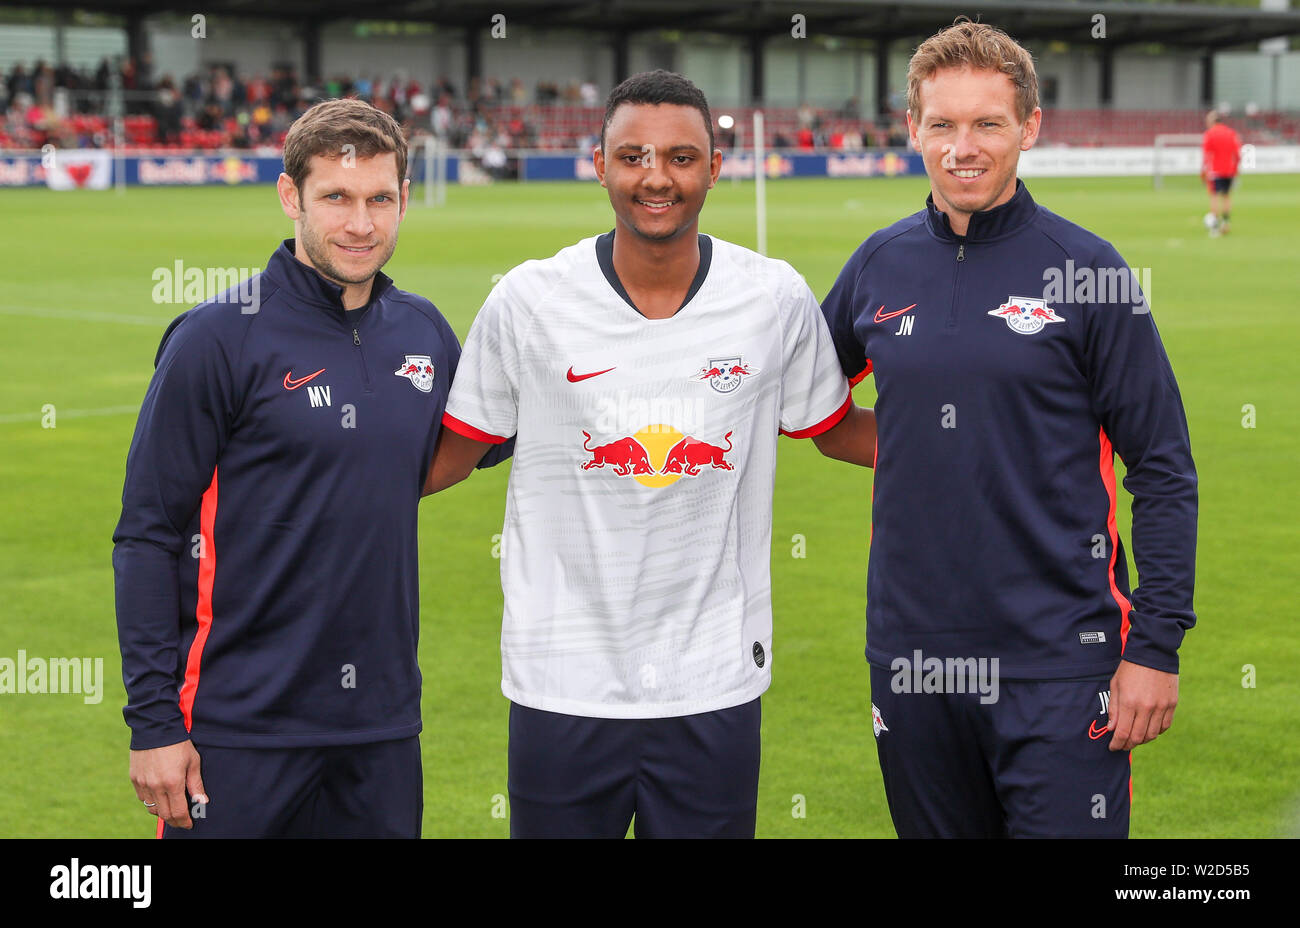 Leipzig, Germany. 08th July, 2019. Soccer: Bundesliga, RB Leipzig. The Leipzig newcomers: Co-trainer Moritz Volz (l-r), player Luan Candido and the new RB coach Julian Nagelsmann are on the court before the first training session. Credit: Jan Woitas/dpa-Zentralbild/dpa - IMPORTANT NOTE: In accordance with the requirements of the DFL Deutsche Fußball Liga or the DFB Deutscher Fußball-Bund, it is prohibited to use or have used photographs taken in the stadium and/or the match in the form of sequence images and/or video-like photo sequences./dpa/Alamy Live News Stock Photo